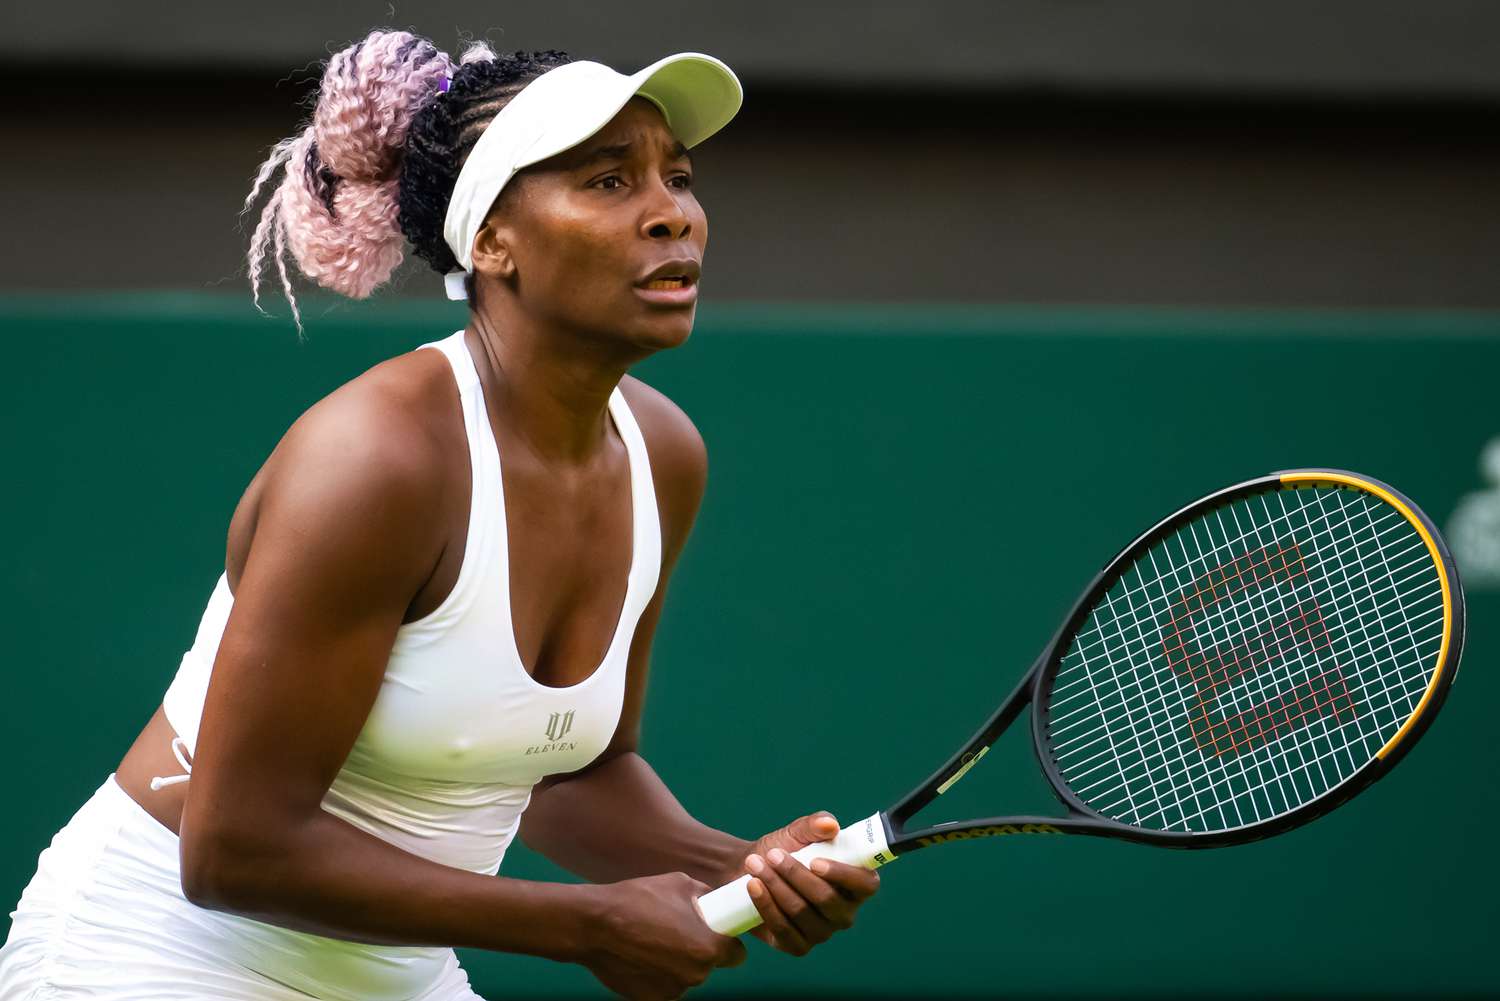 How Much Is Venus Williams Net Worth? A Look At Her Impressive Wealth